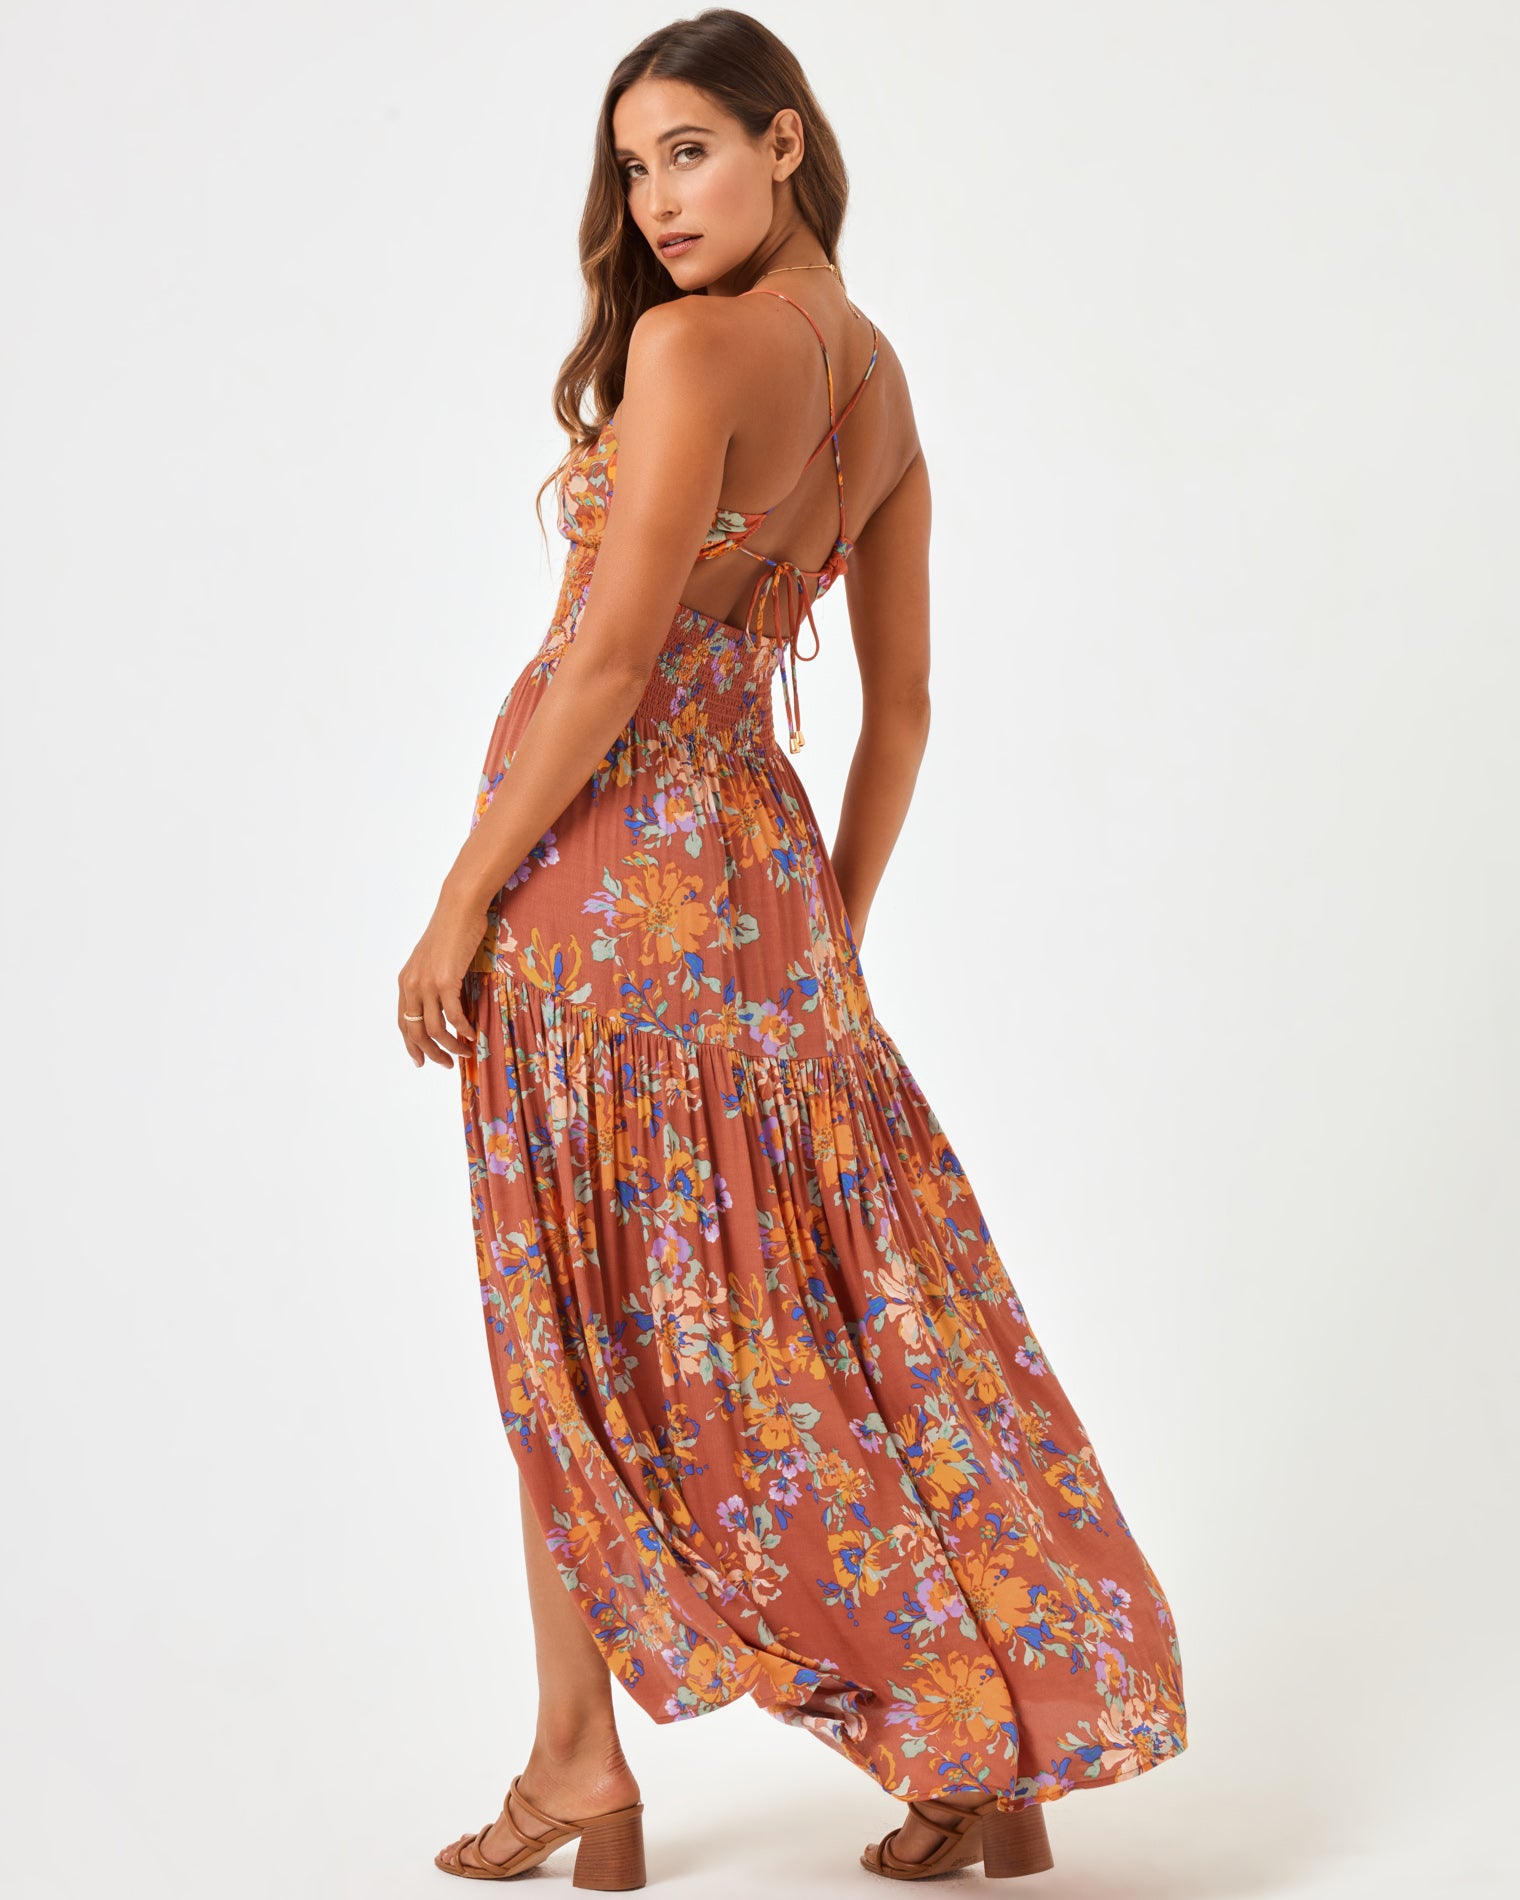 Printed Calla Dress - First Bloom First Bloom | Model: Taylor (size: S)